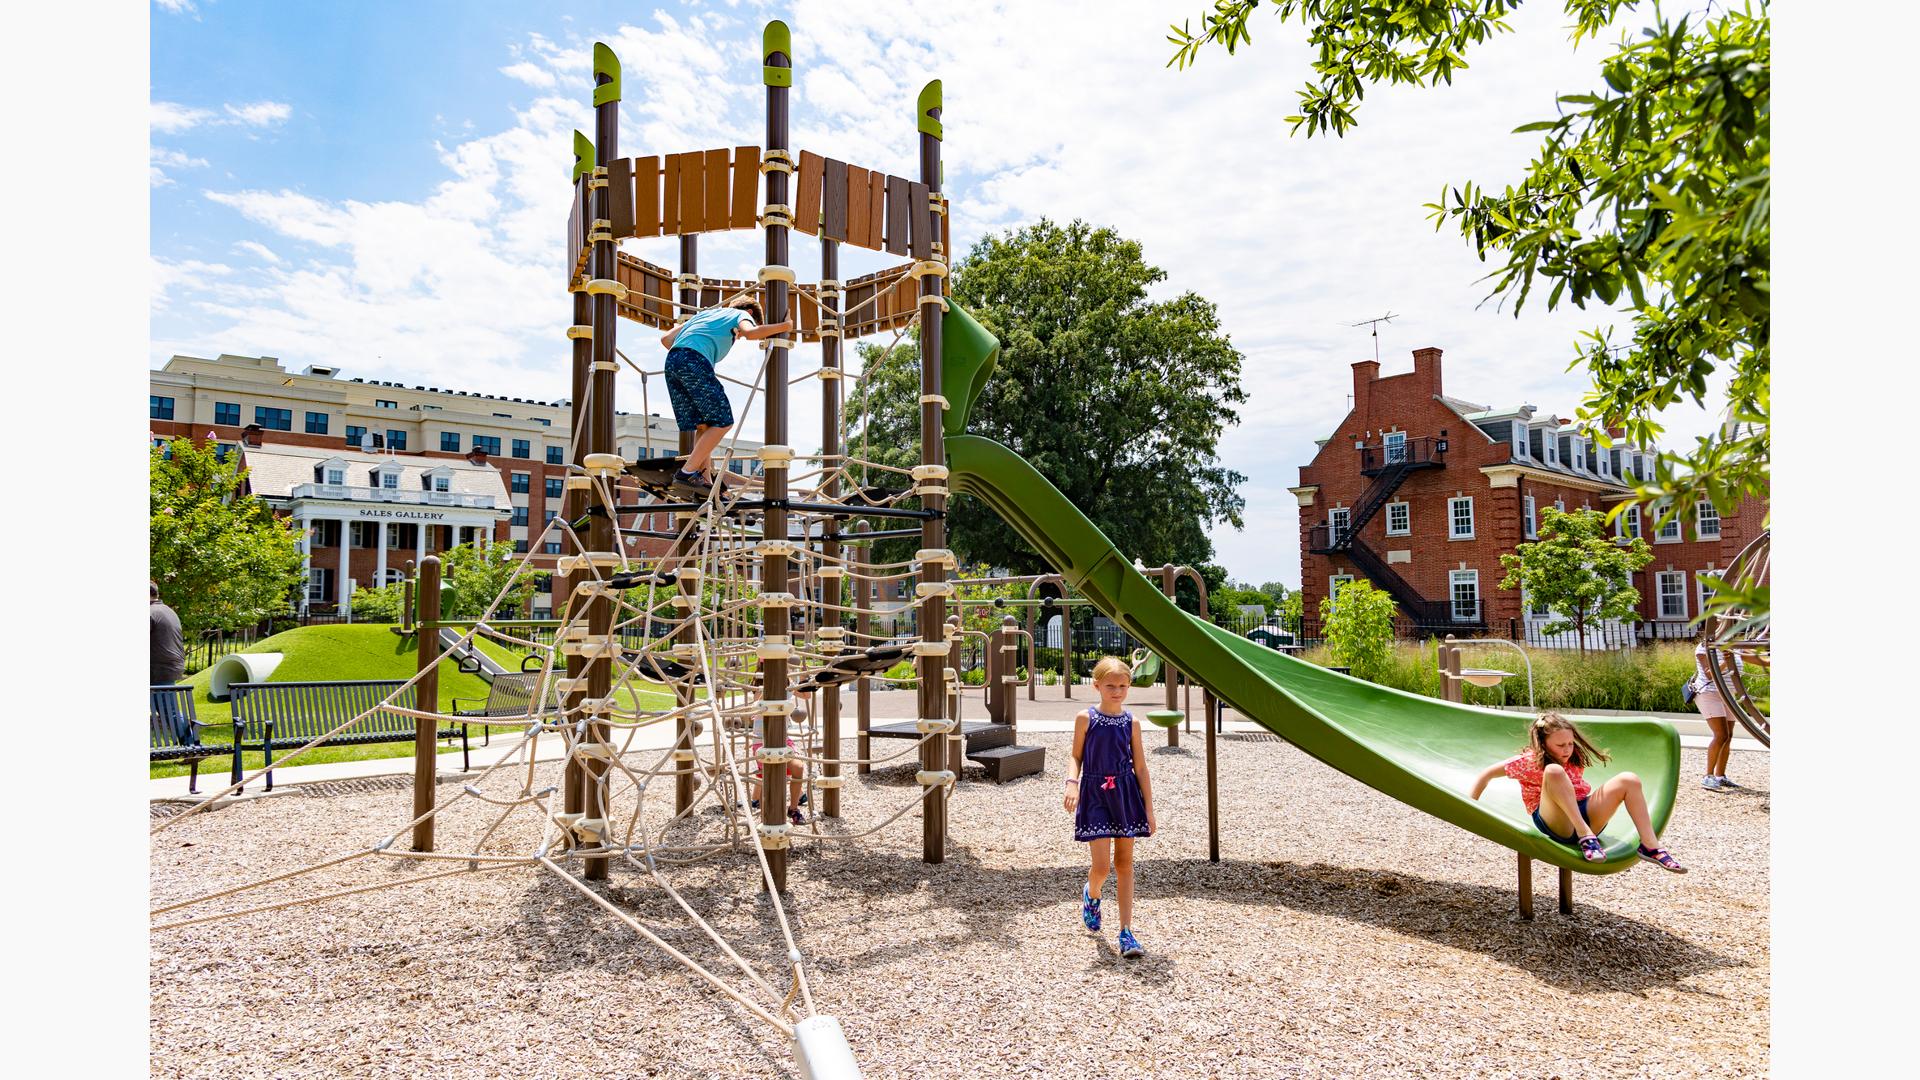 A natural wood-like and net play-based play structure with a girl sliding down a green Alpine Slide.